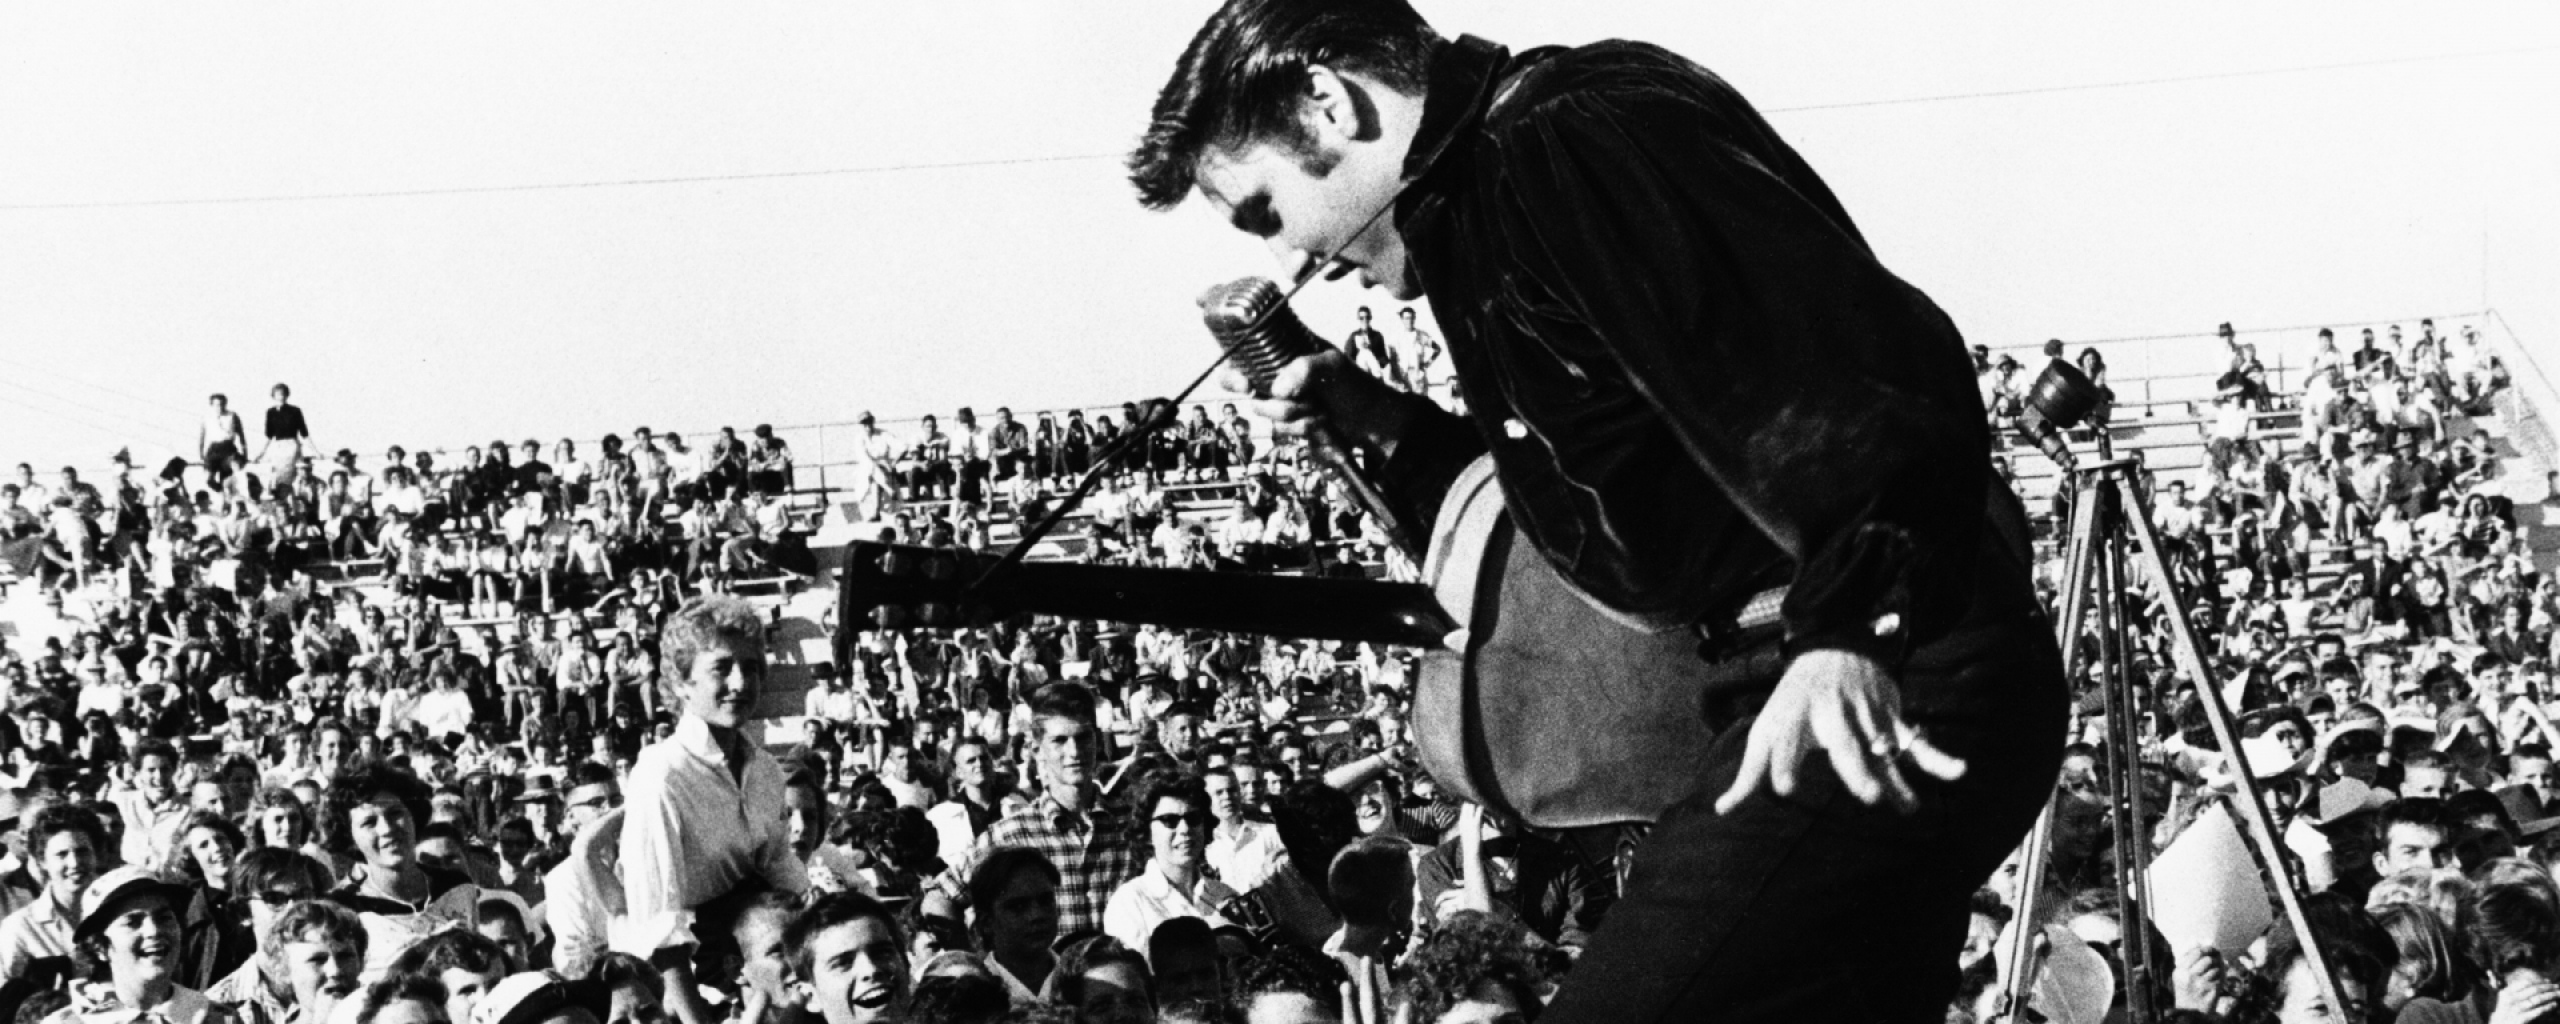 Elvis Presley Wallpapers High Resolution and Quality Download